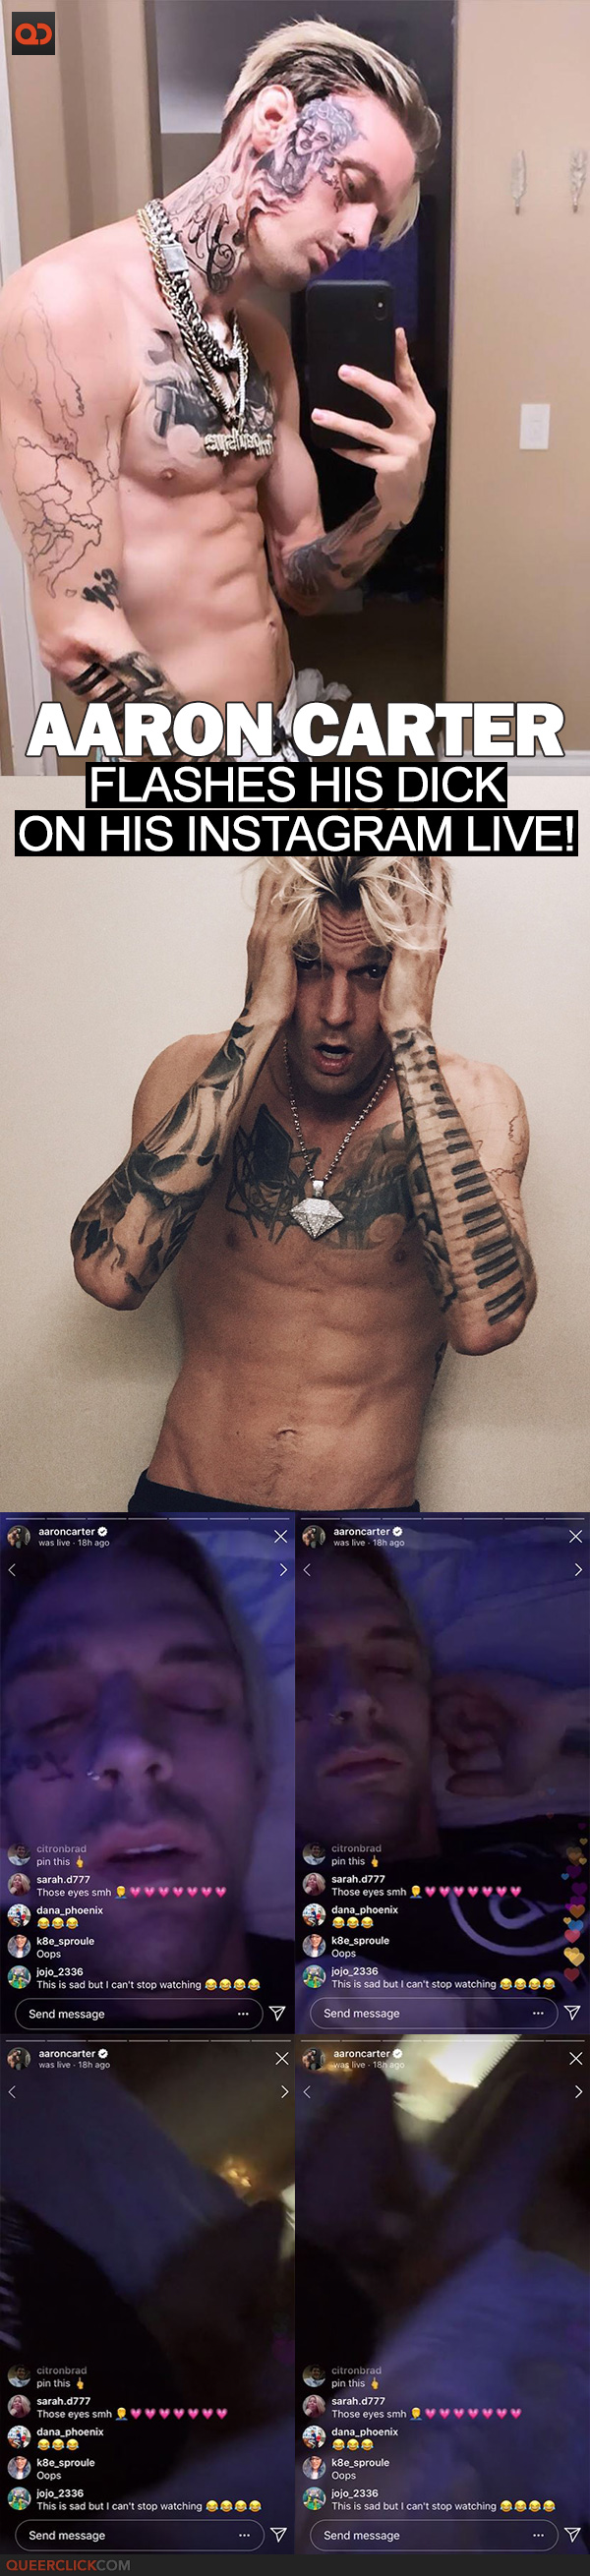 Aaron Carter Flashed His Dick On Instagram Live!